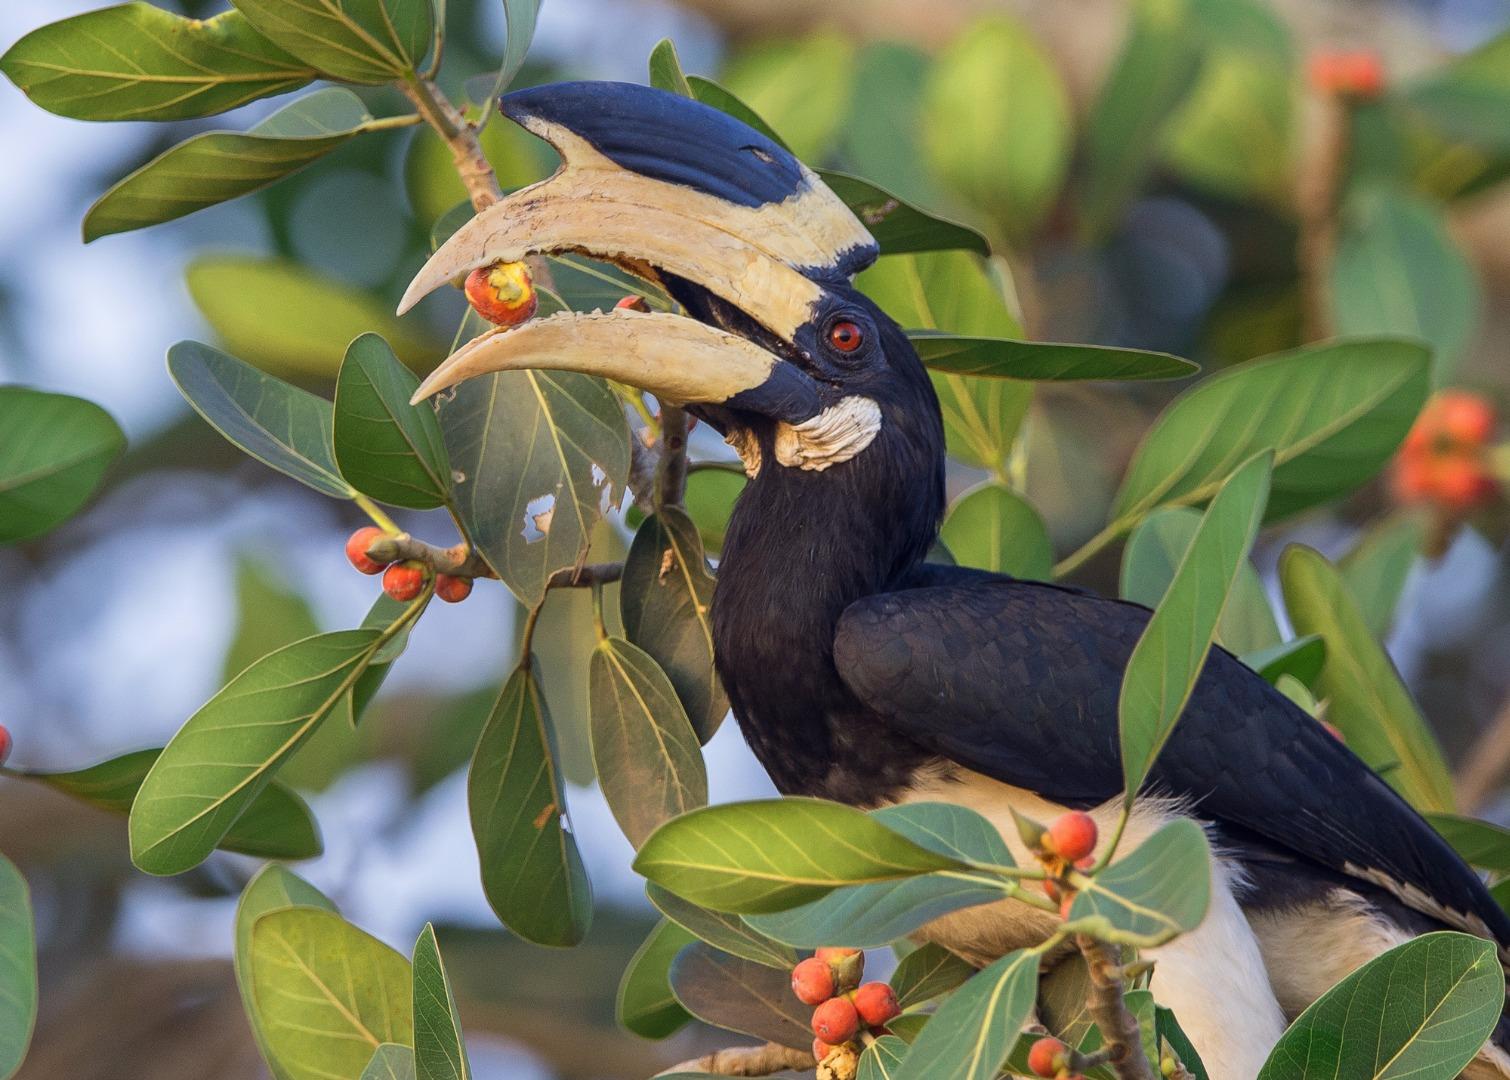 Malabar Pied Hornbill with the